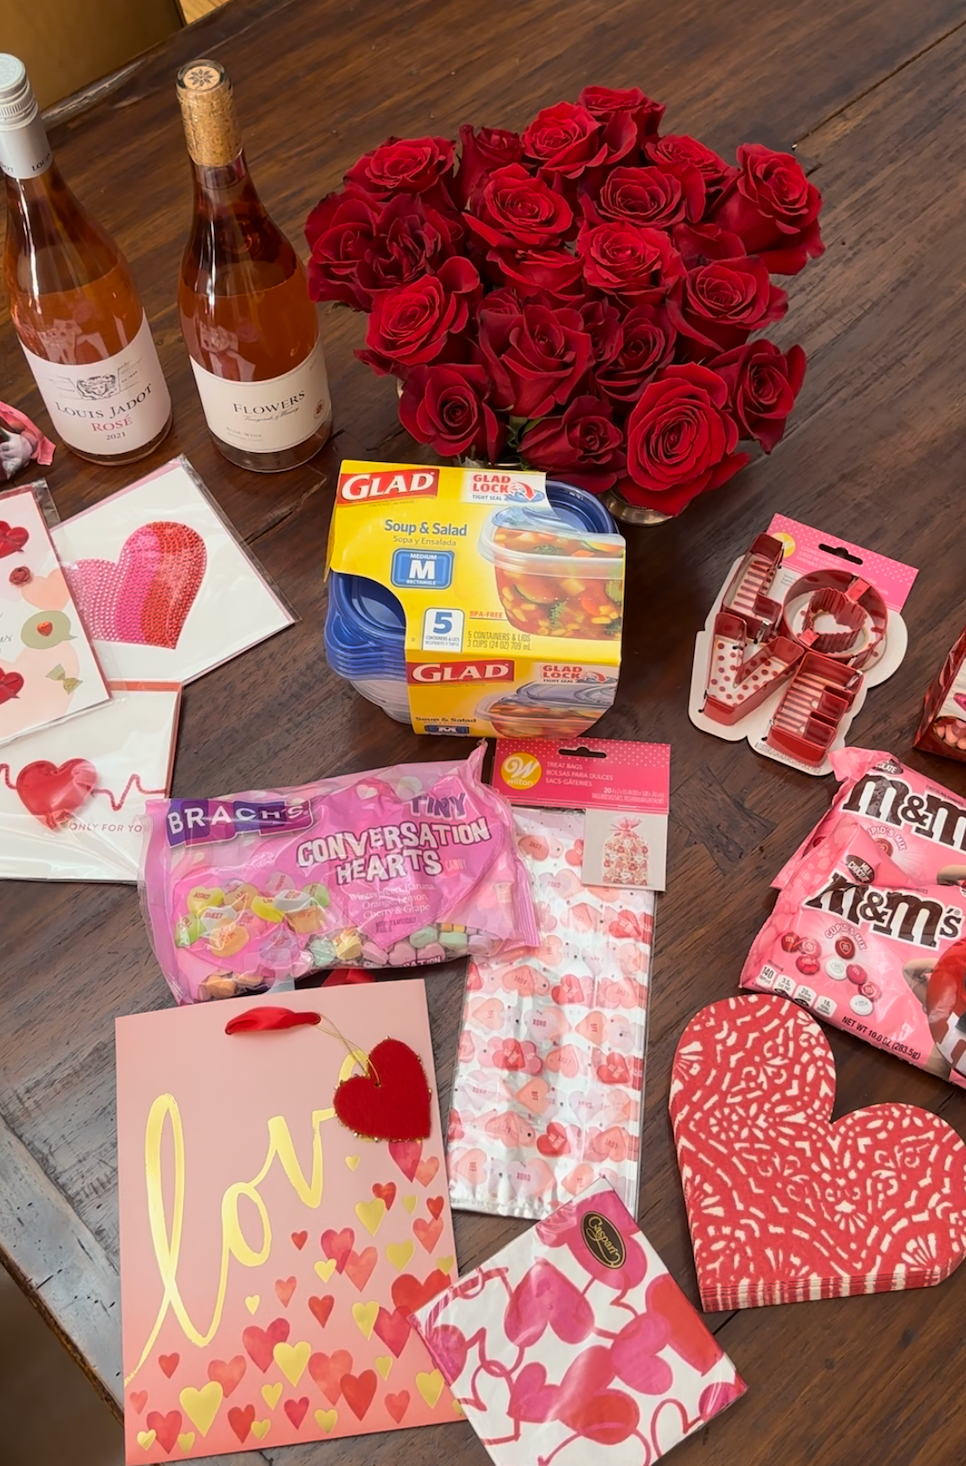 How To Host the Perfect Galentines Event